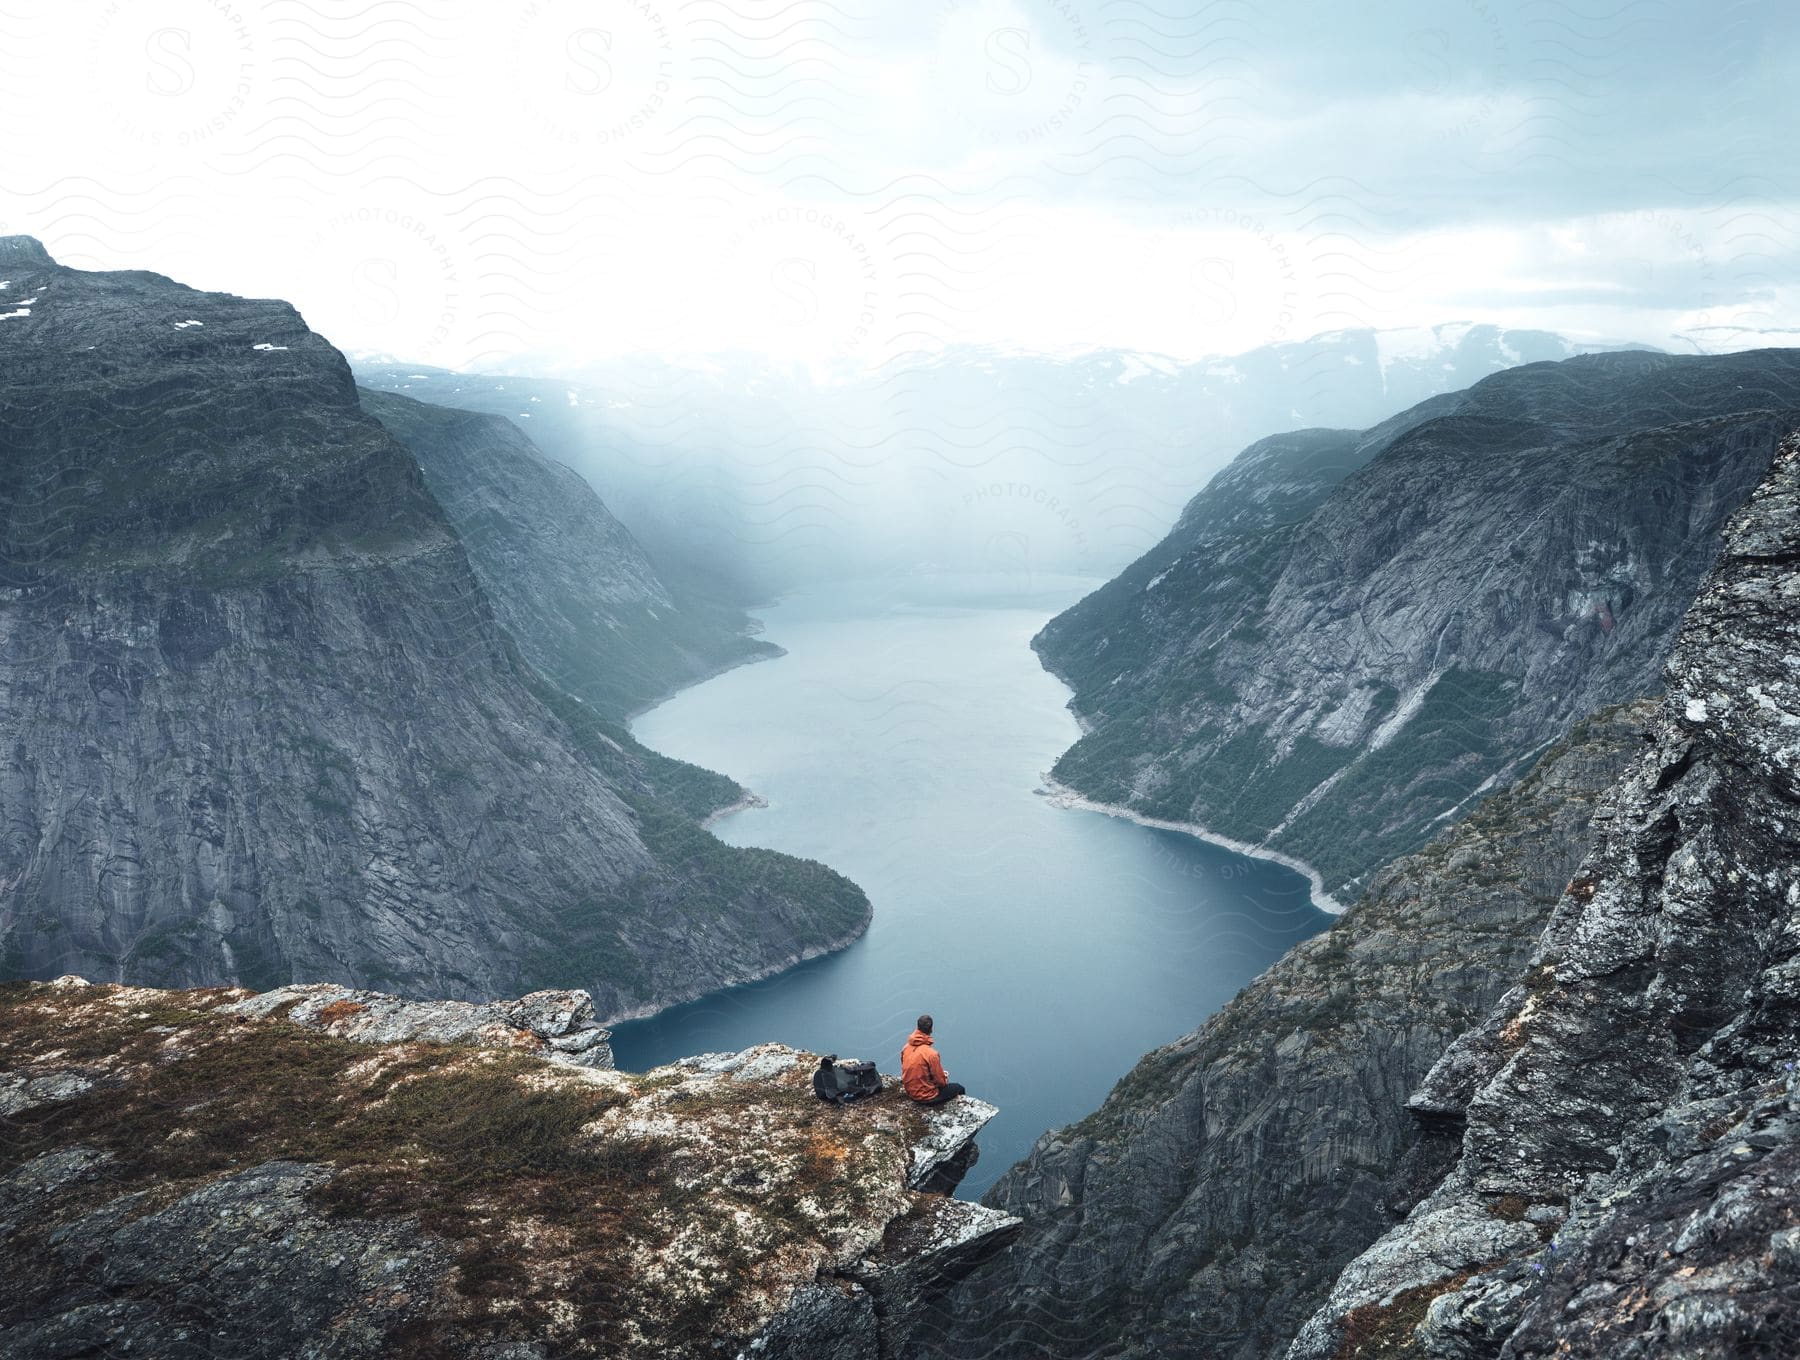 Man in orange jacket sitting on mountain edge looking at mountain range and wide river